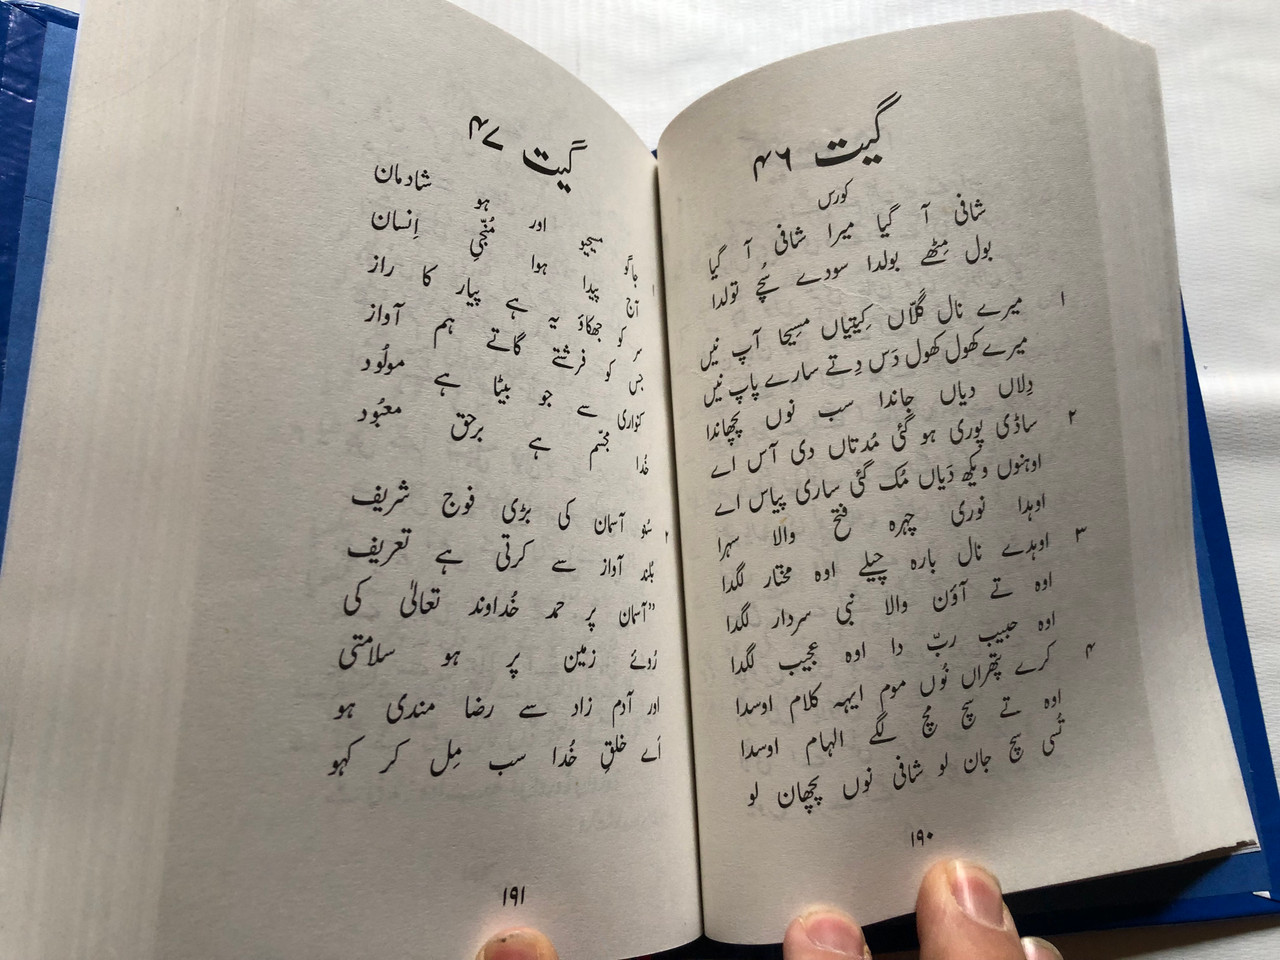 https://cdn11.bigcommerce.com/s-62bdpkt7pb/products/62296/images/314632/Most_Popular_Urdu_Language_Sialkot_Christian_Hymnal_and_Song_Book_Niral_5__40782.1701602318.1280.1280.JPG?c=2